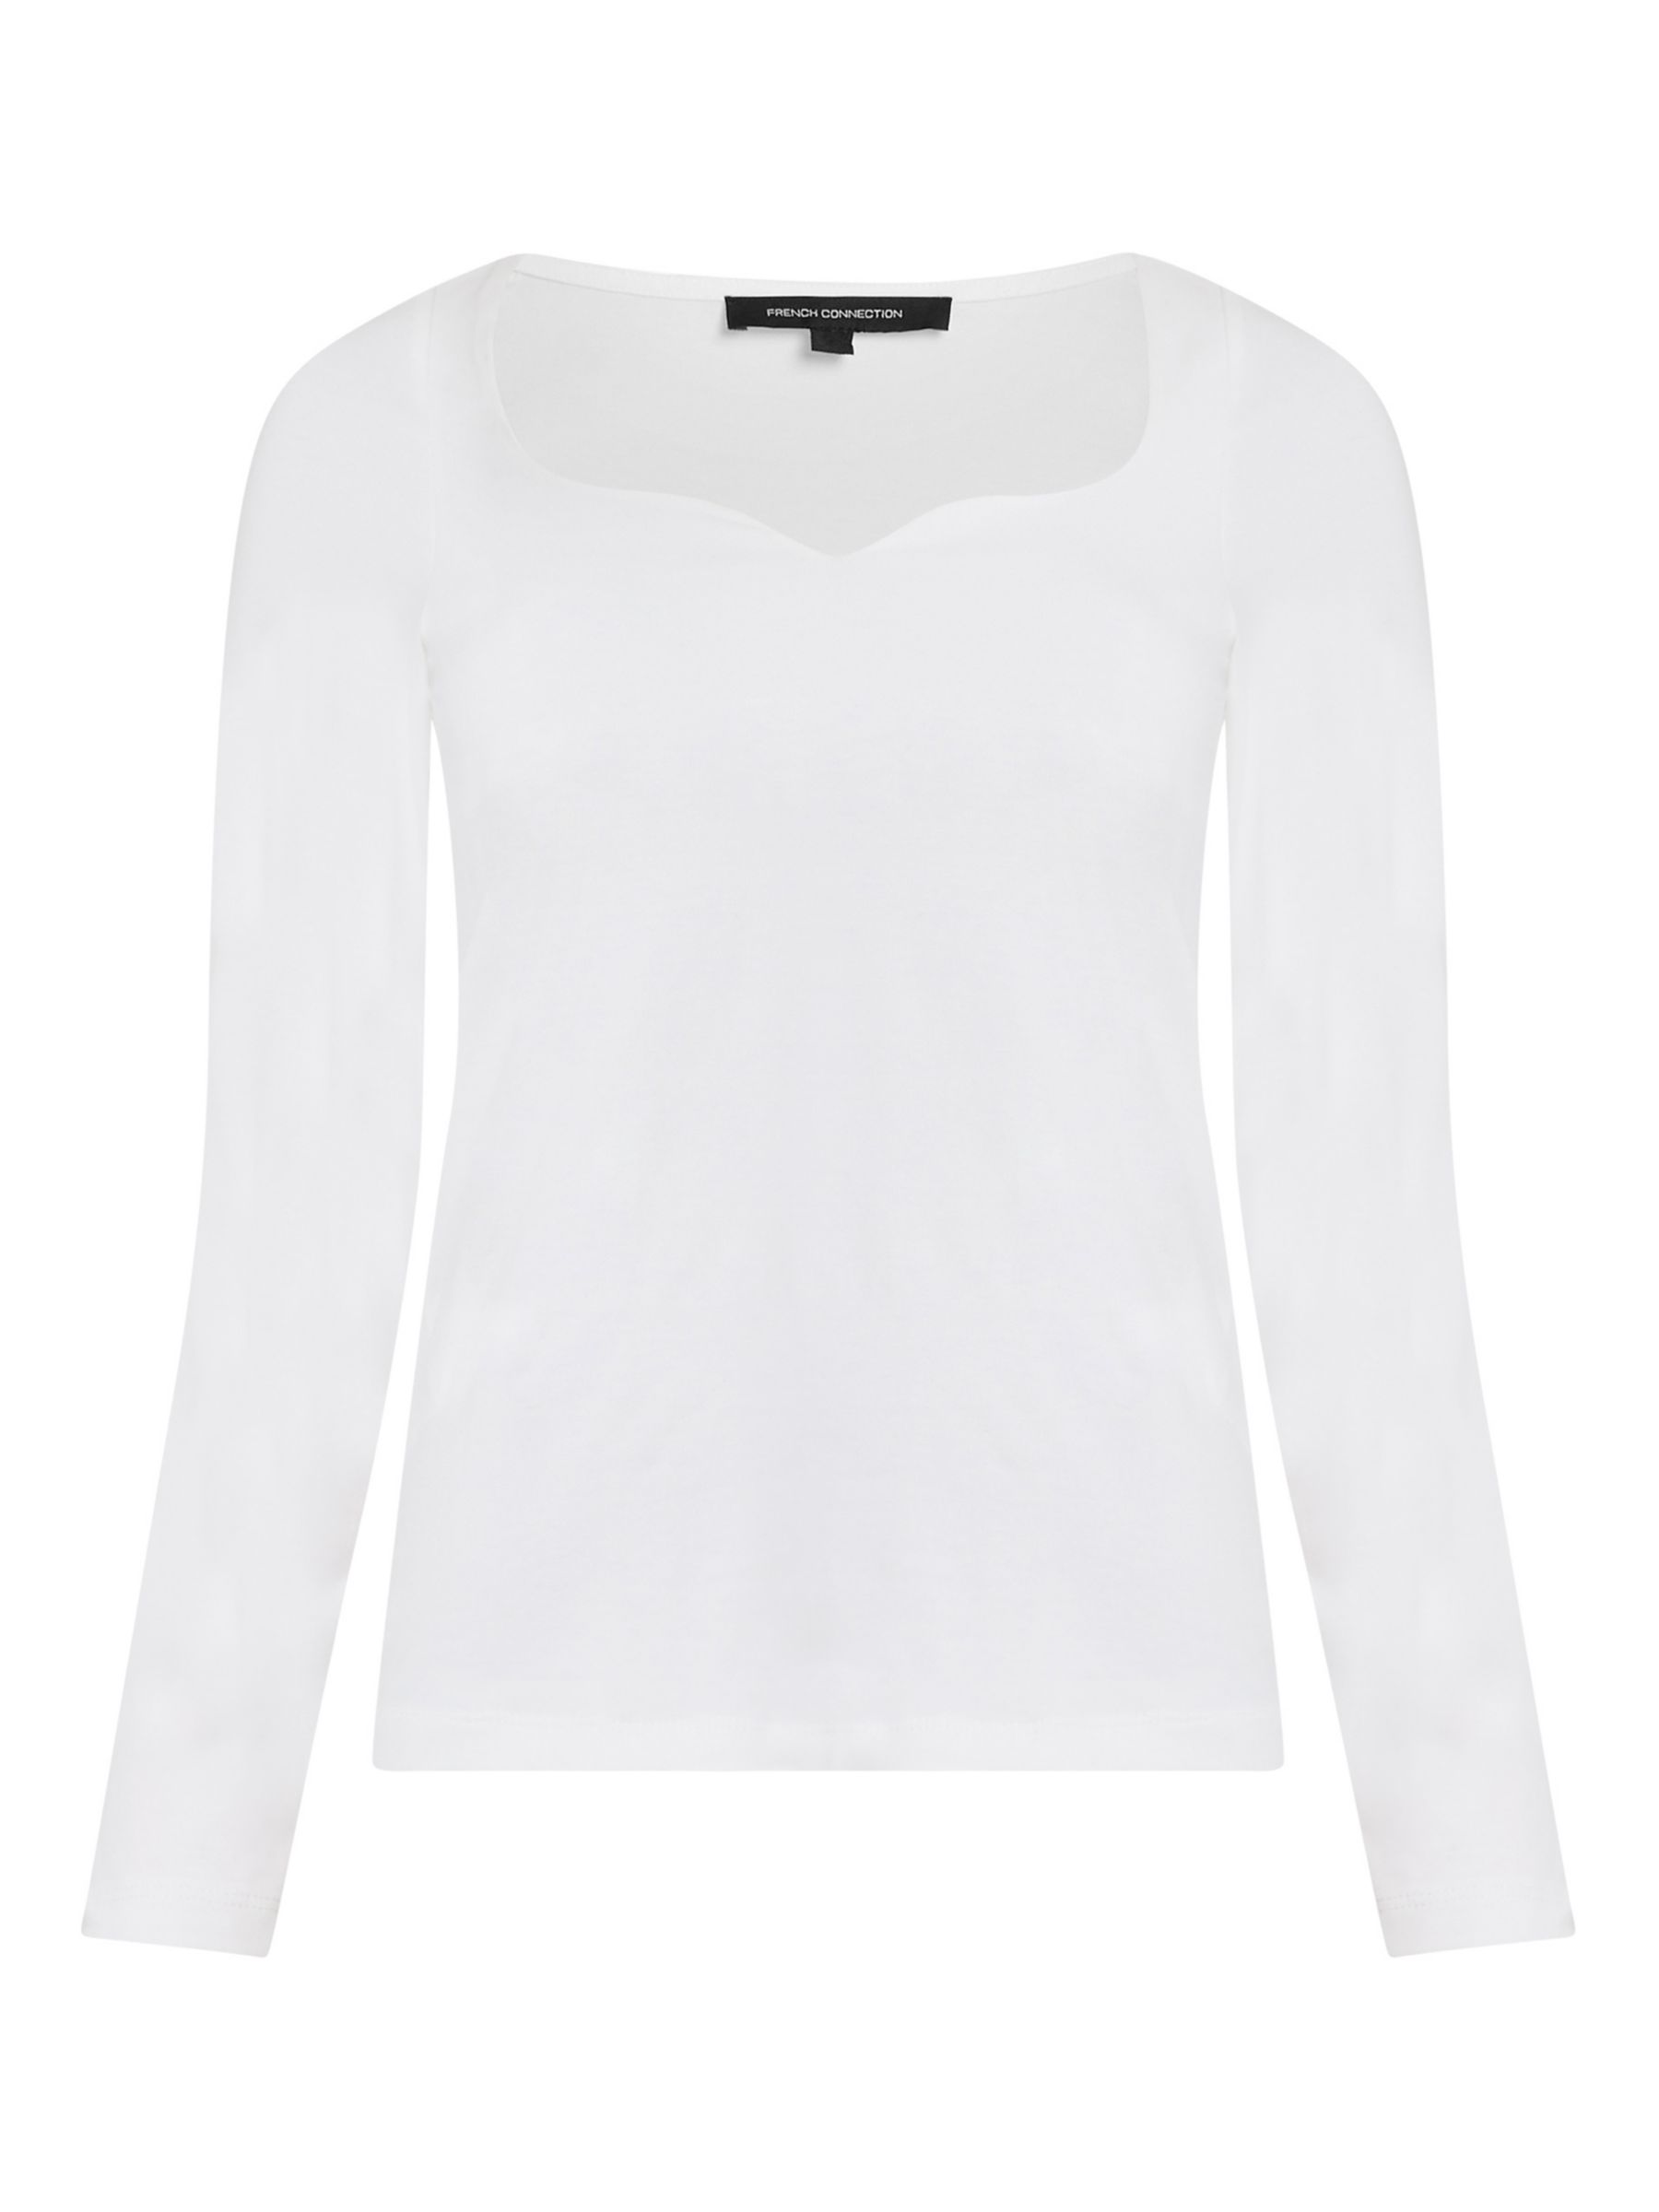 French Connection Rallie Top, Winter White at John Lewis & Partners